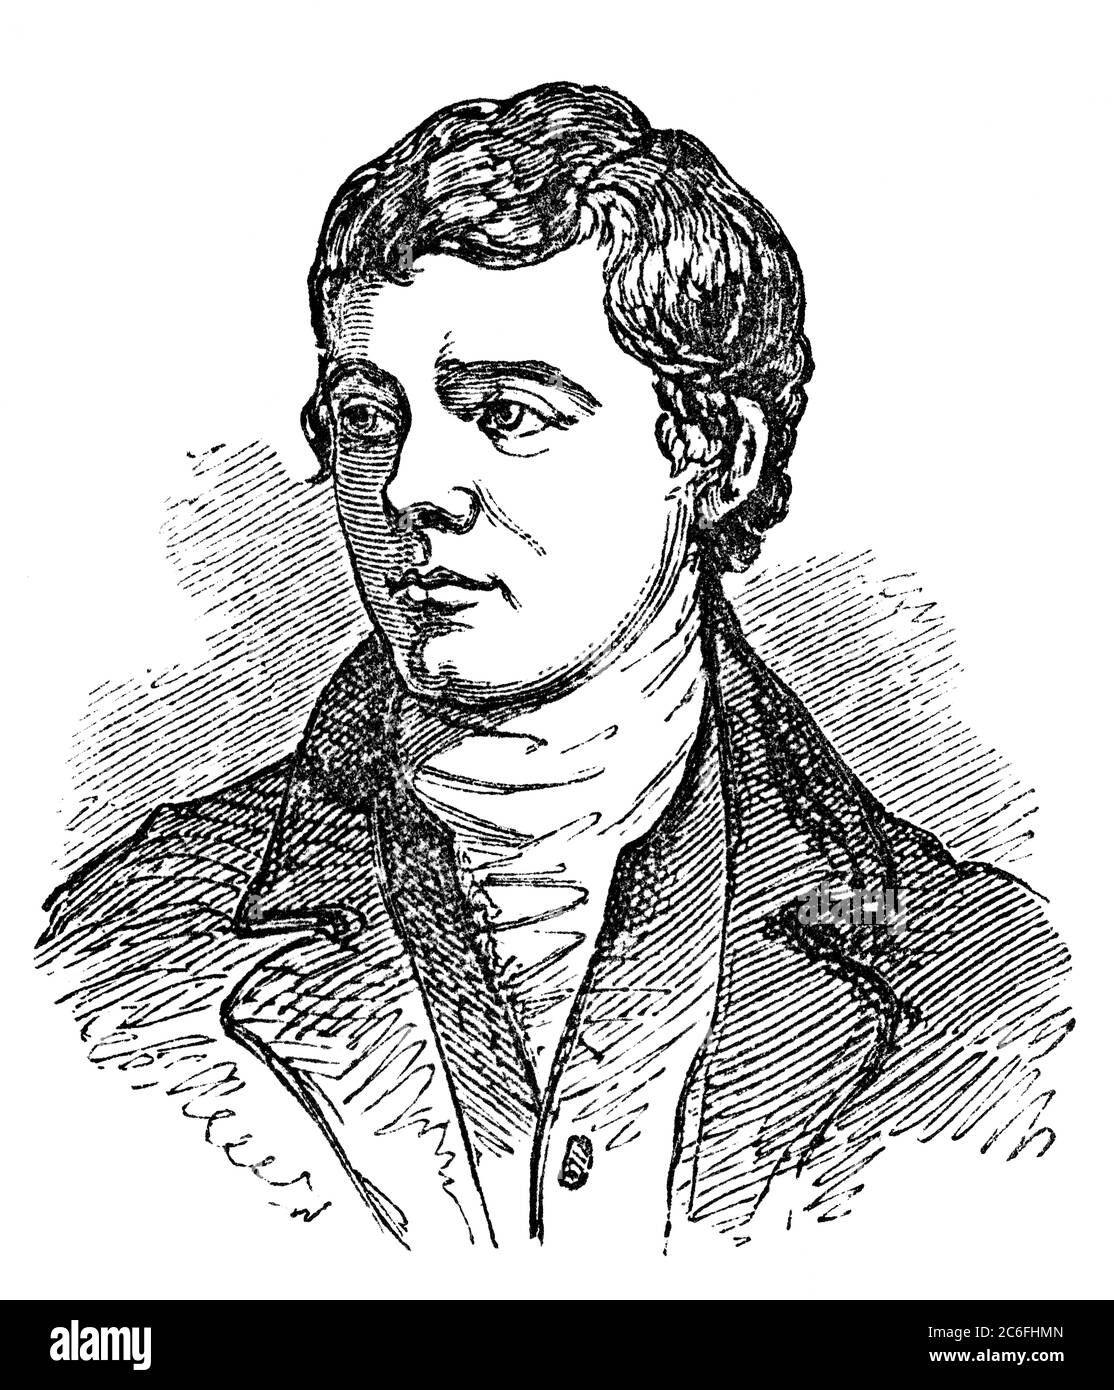 An engraved vintage illustration portrait drawing of Robert Burns the famous Scottish poet and author of Auld Lang Syne, from a Victorian book dated 1 Stock Photo